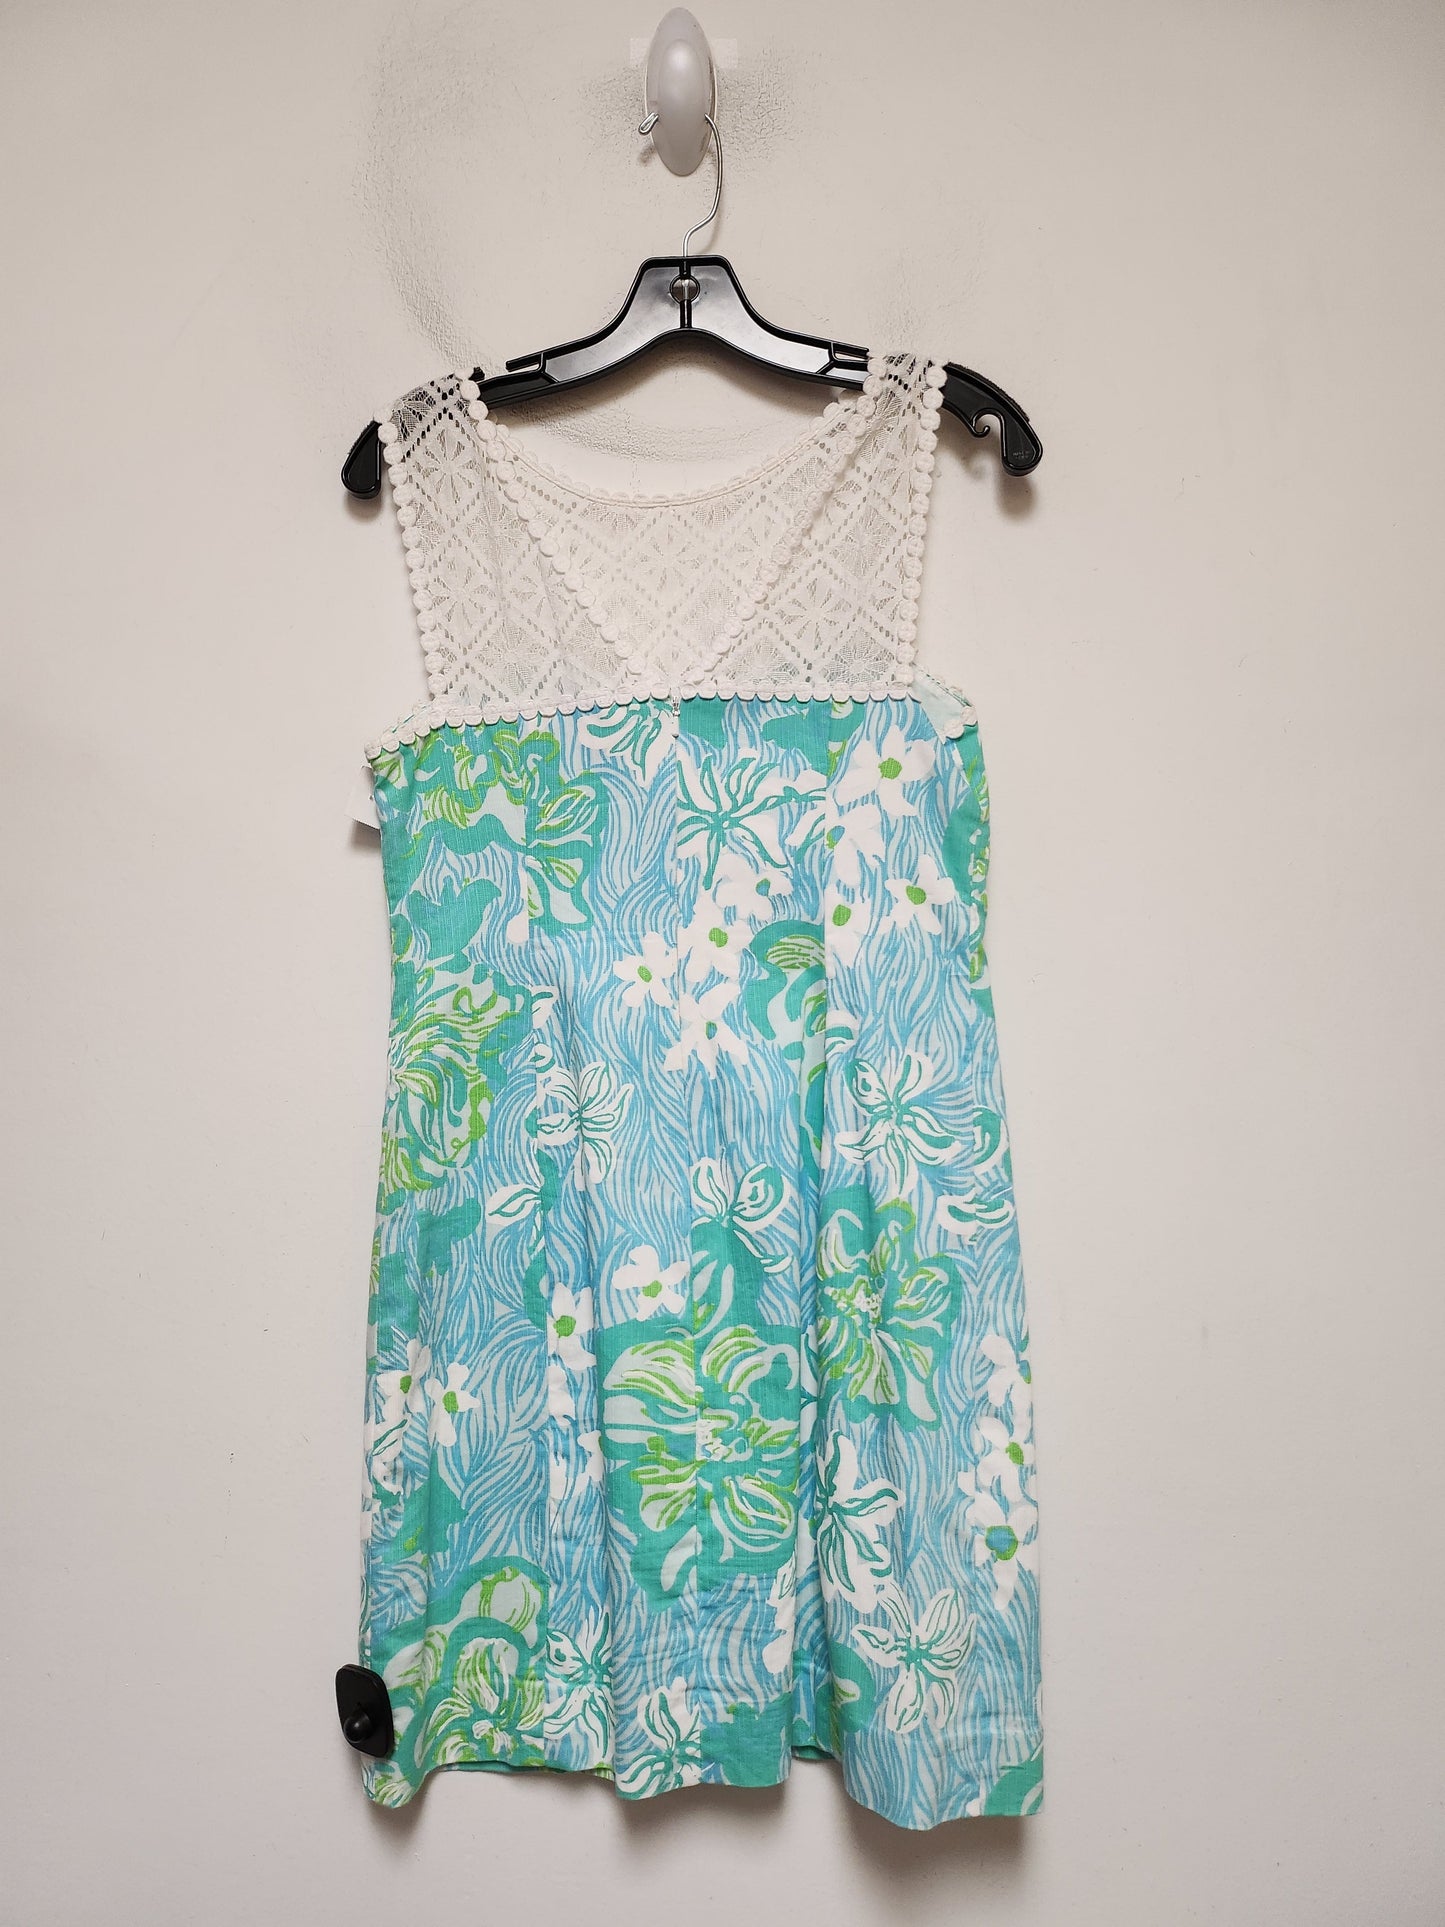 Blue & Green Dress Casual Short Lilly Pulitzer, Size Xs